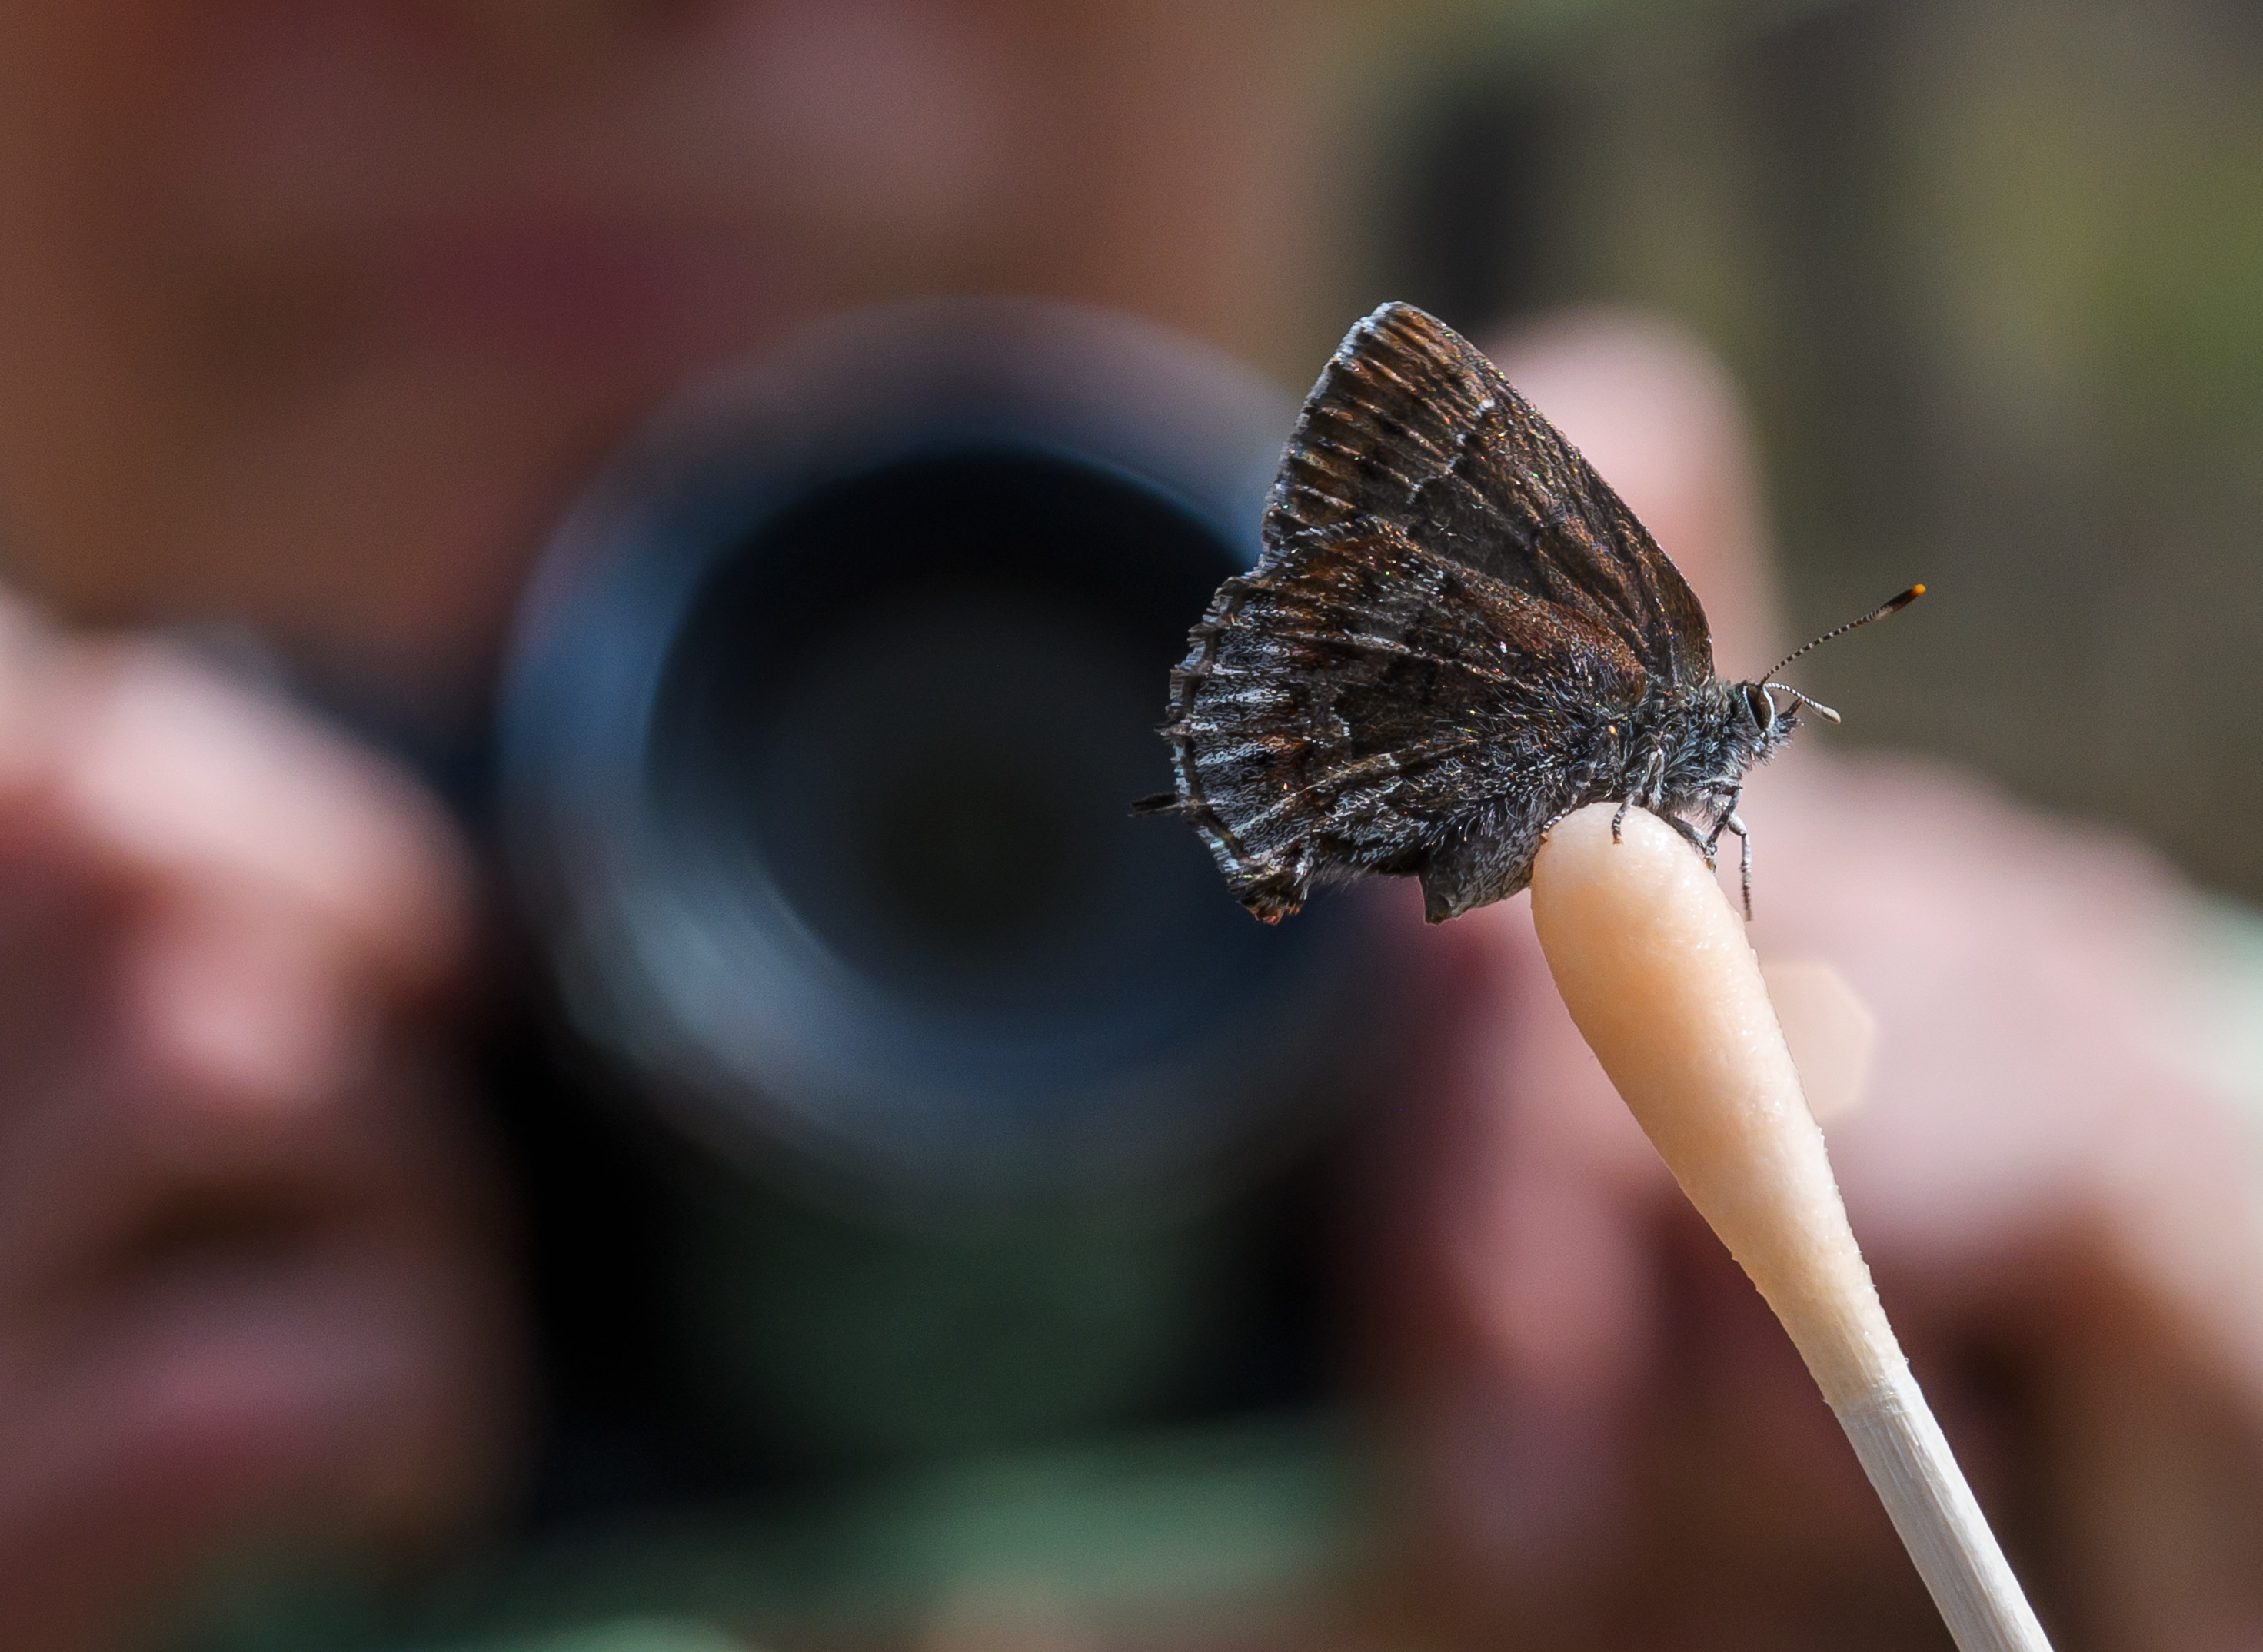 A close up image of a researcher swabbing a butterfly for organisms.